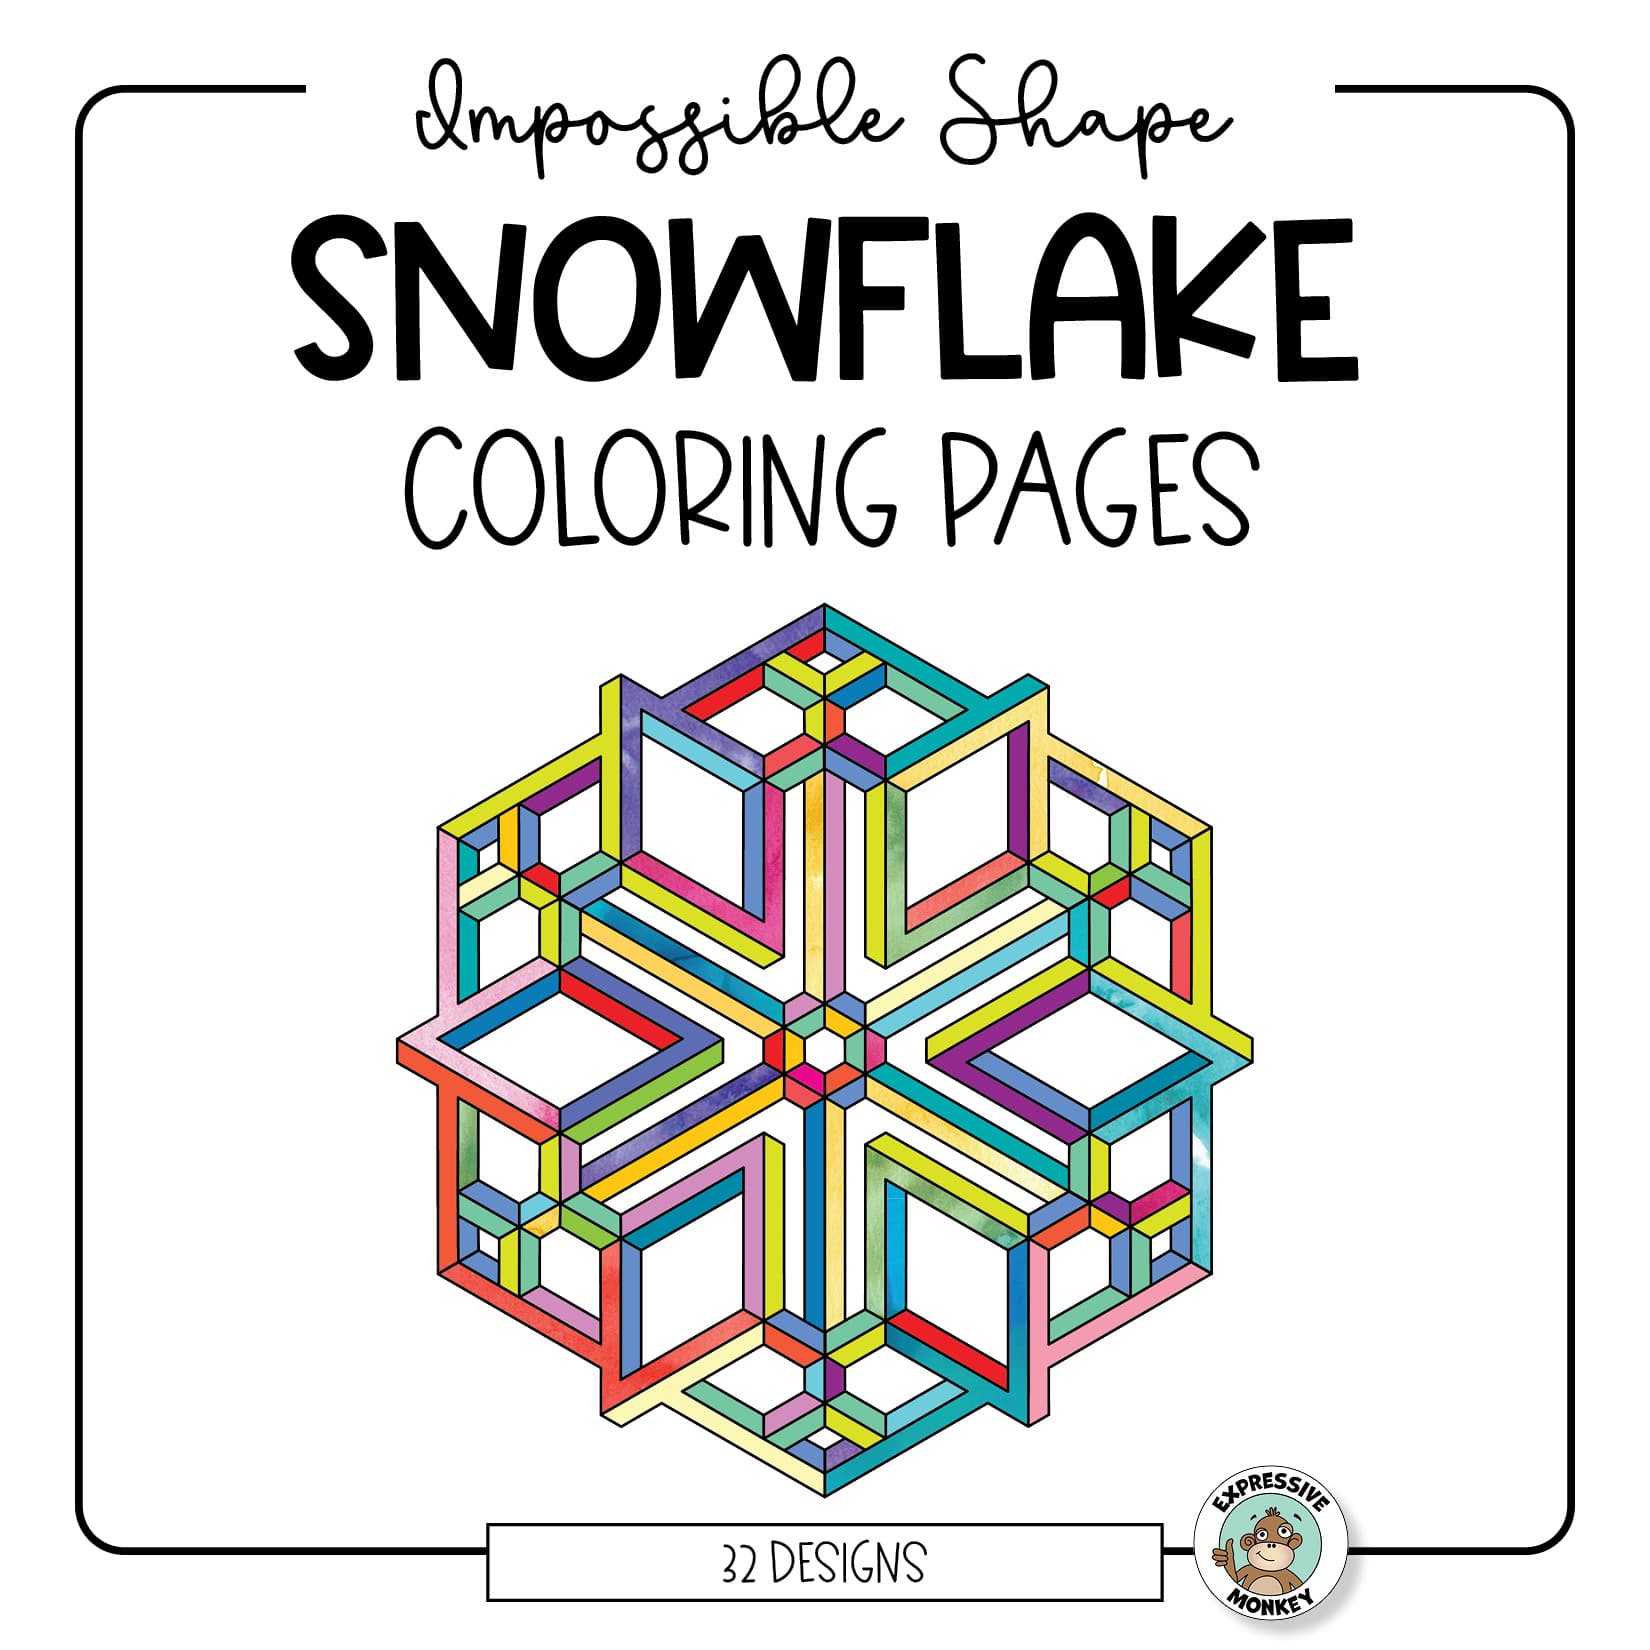 Op art snowflake coloring pages